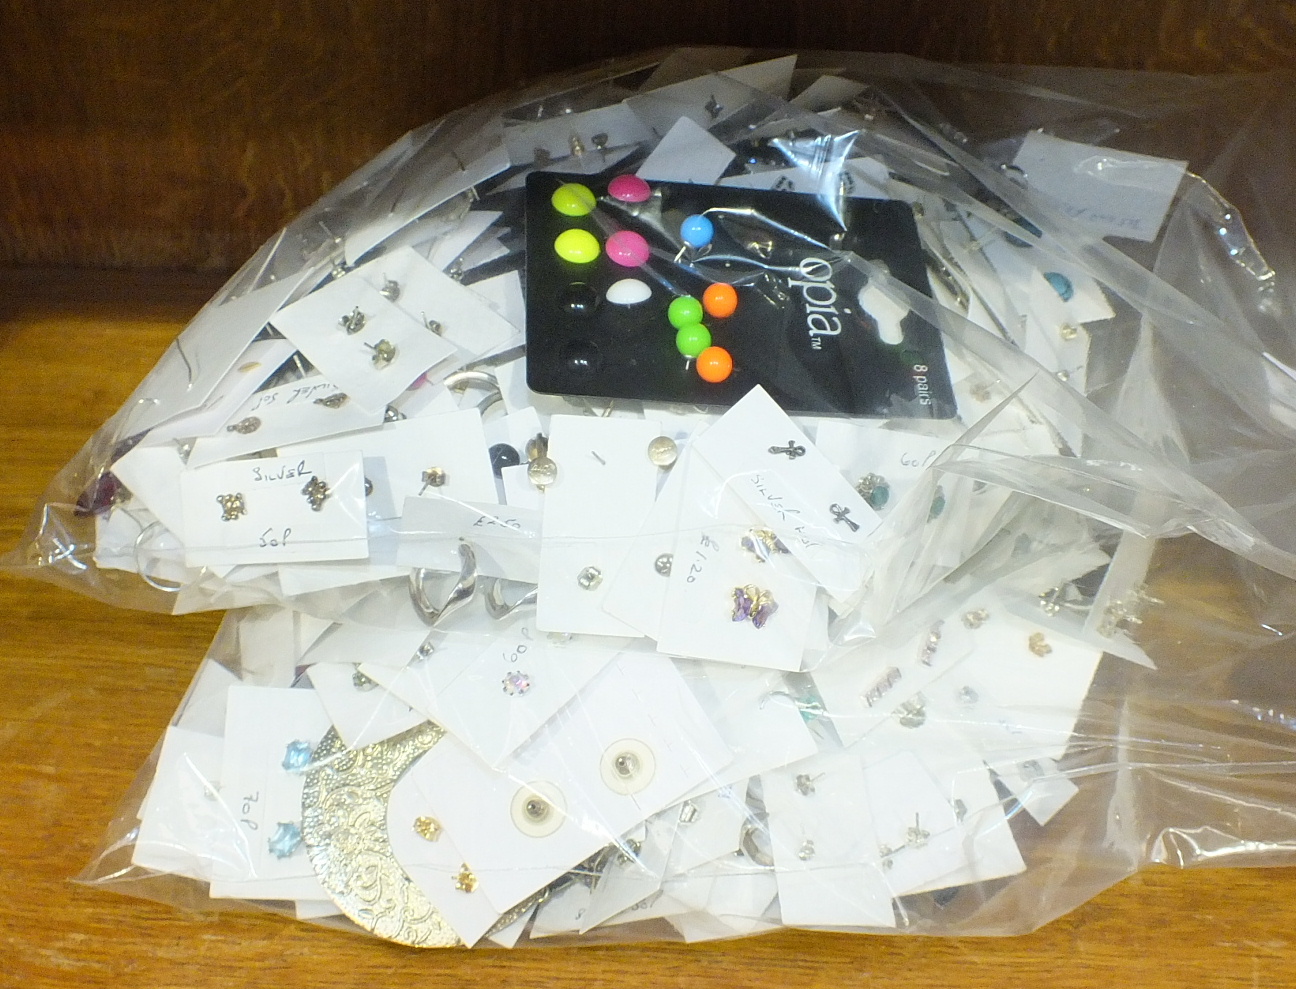 A very large quantity of earrings and ear studs, in excess of 300 pairs.